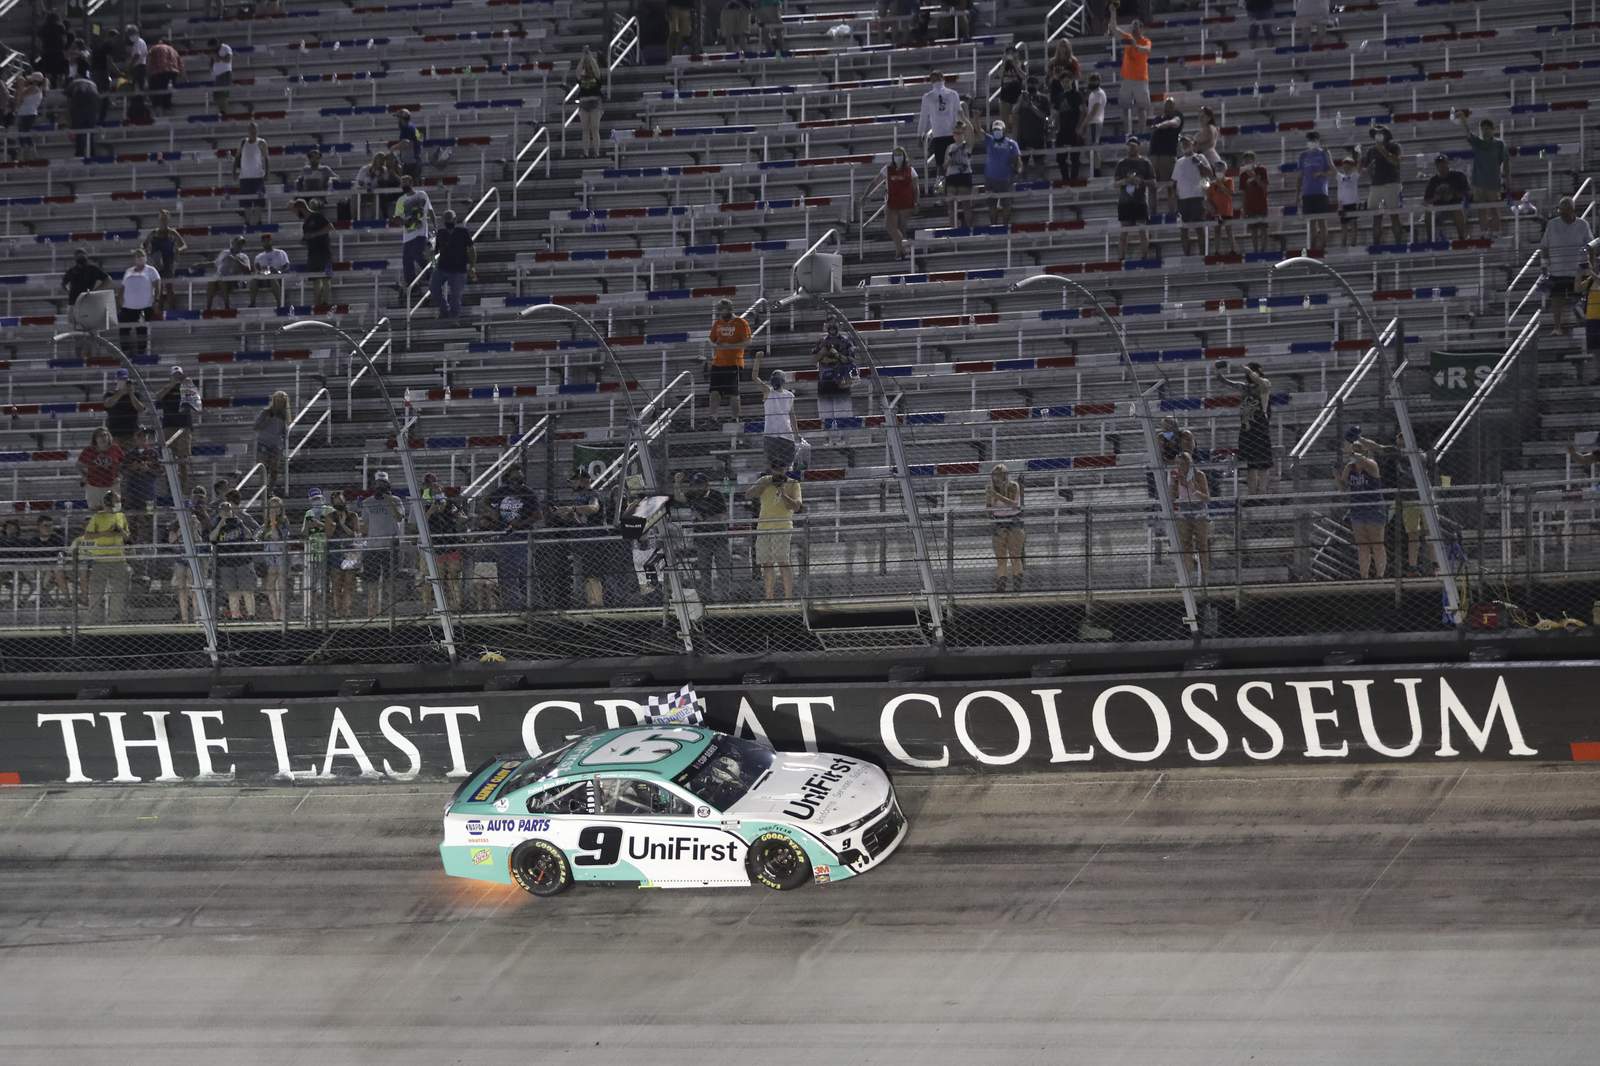 NASCAR reopens gates at Bristol with more tracks to follow